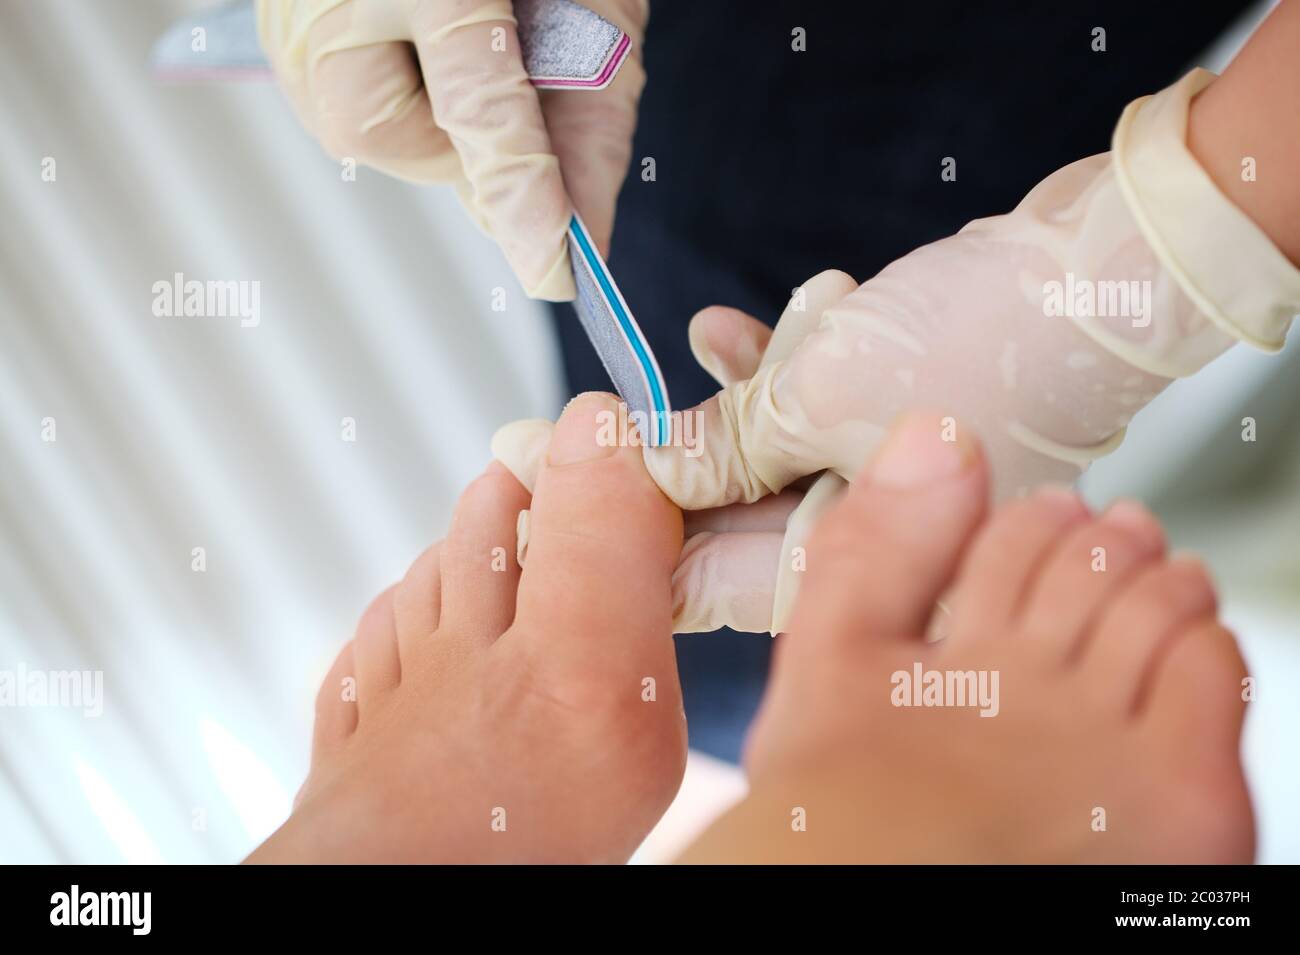 Woman feet during filing Stock Photo